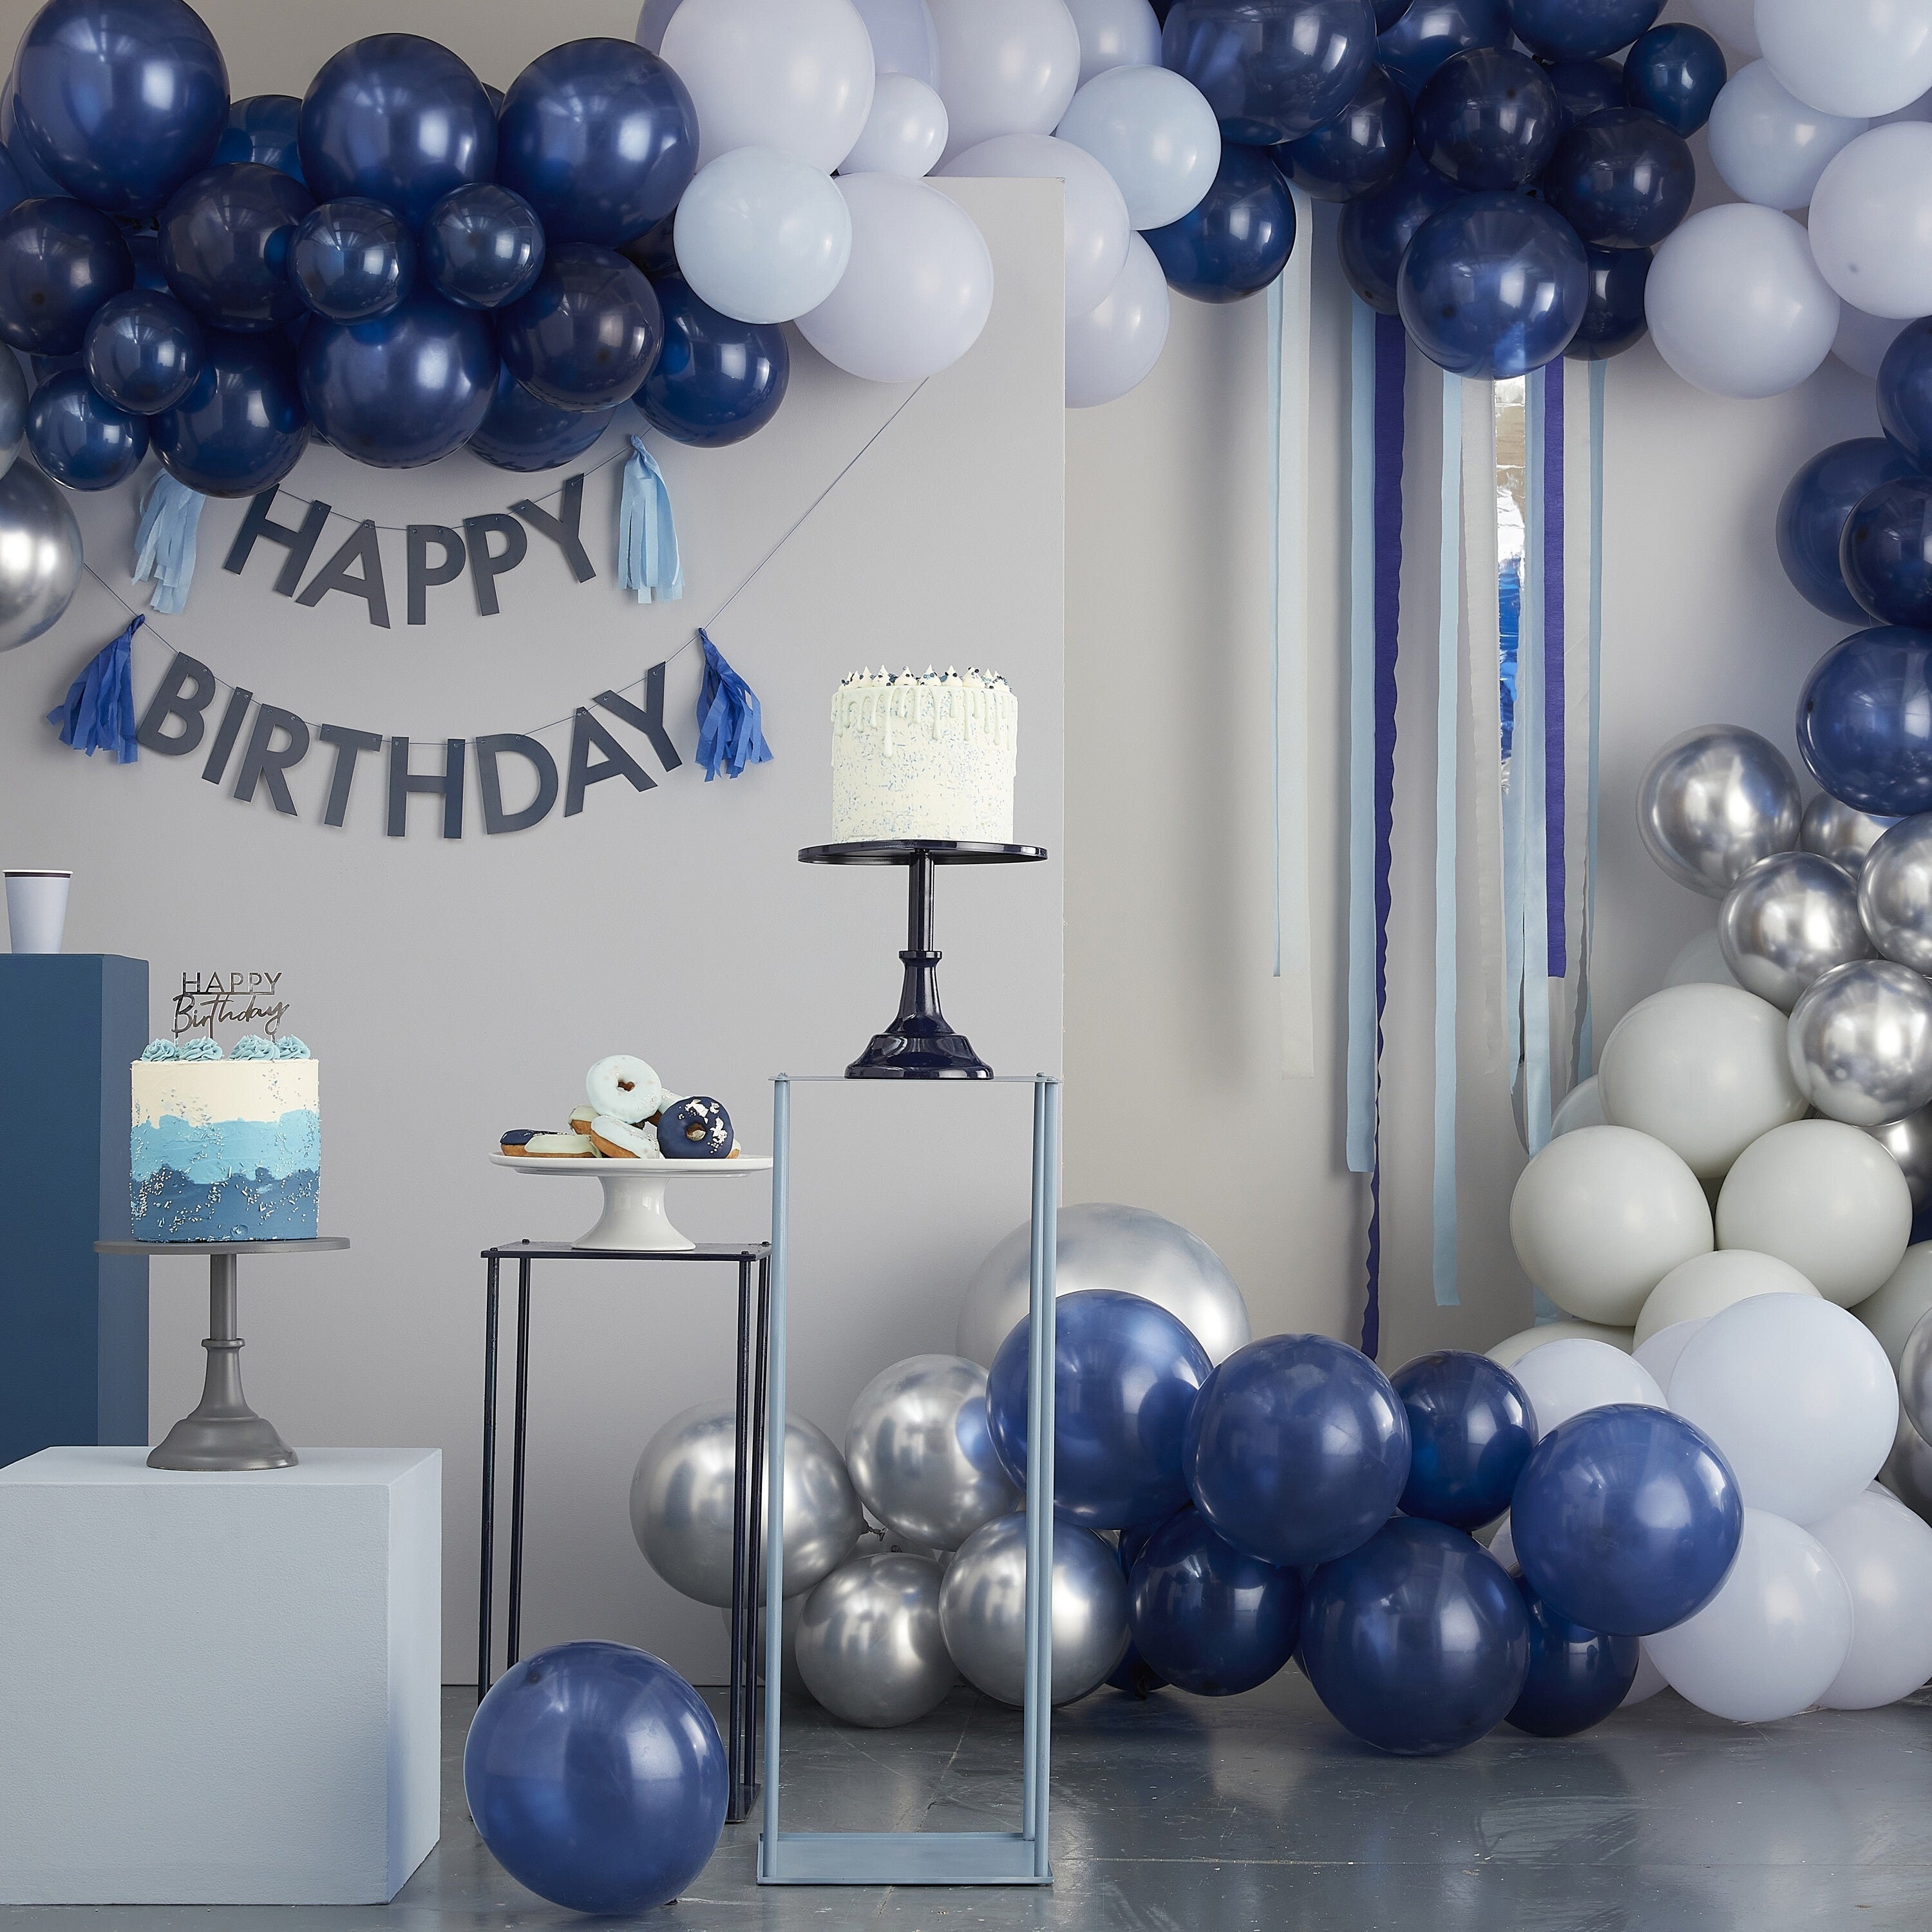 Birthday Party Decorations (Blue)